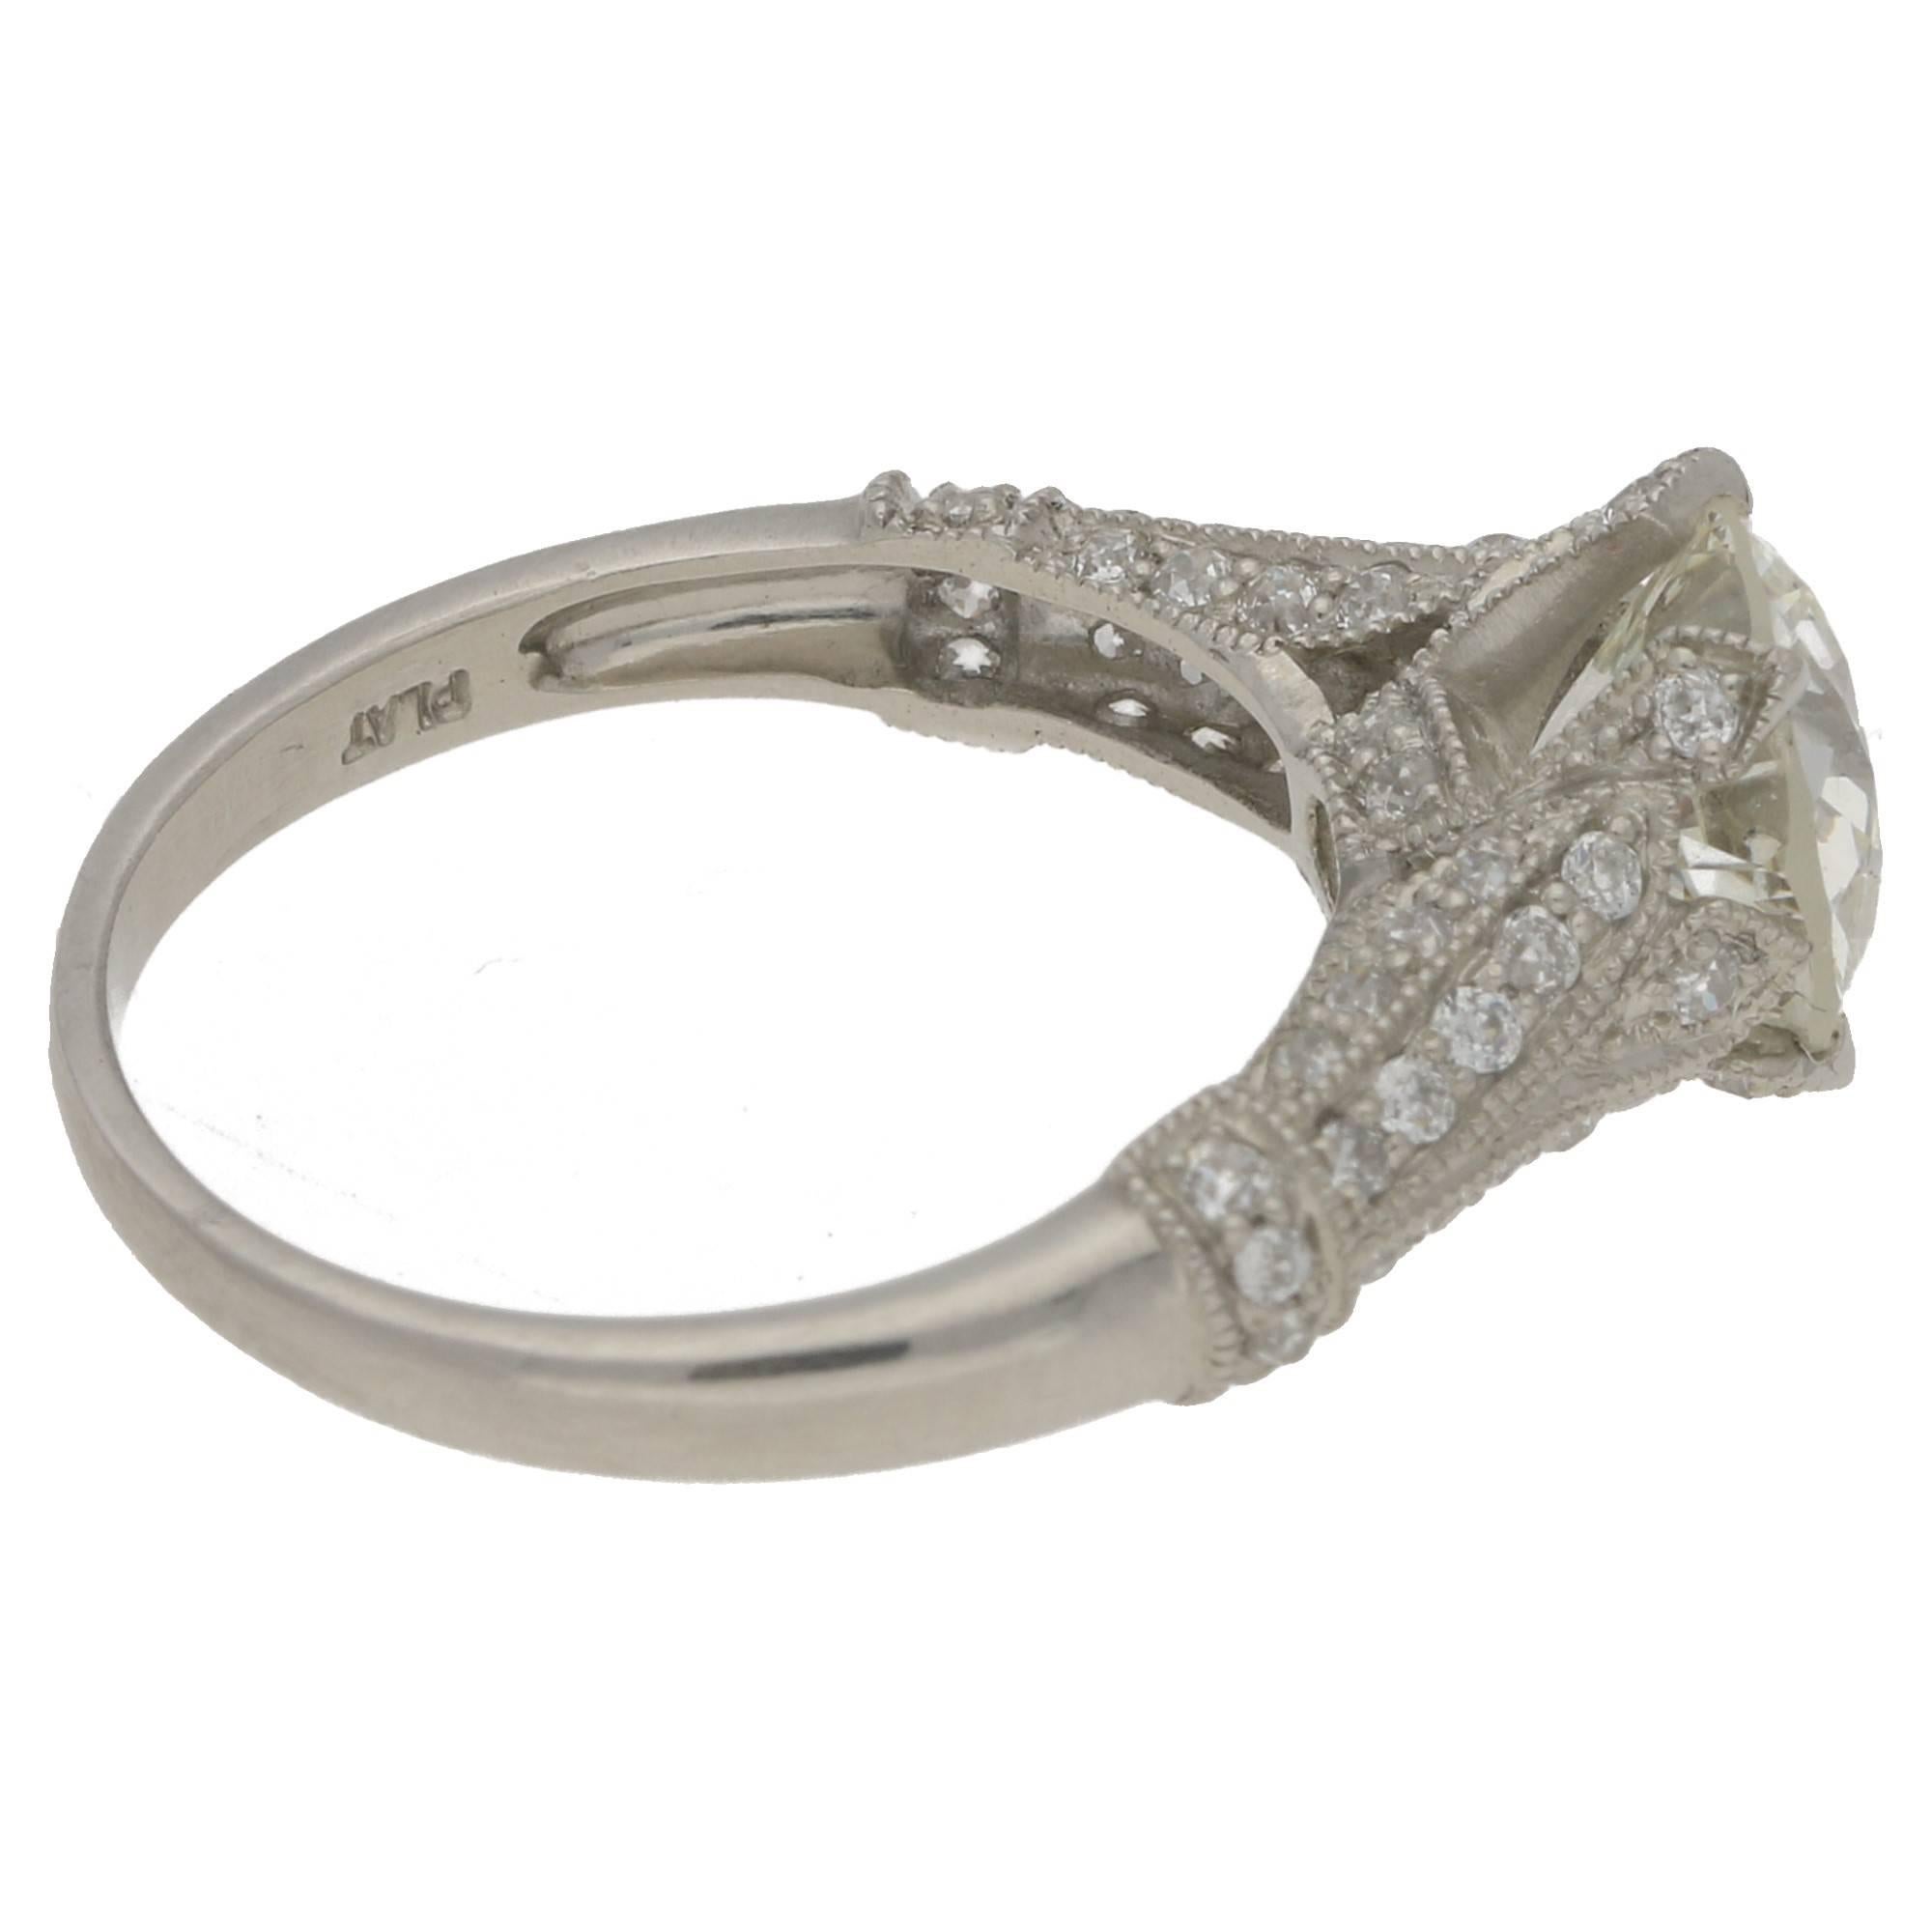 An Edwardian style platinum ring featuring an Old European cut diamond in a four pointed claw setting with diamond grain set shoulders. The centre diamond is independently certified by GCS as 1.84 carats and L colour and Si1 clarity and has